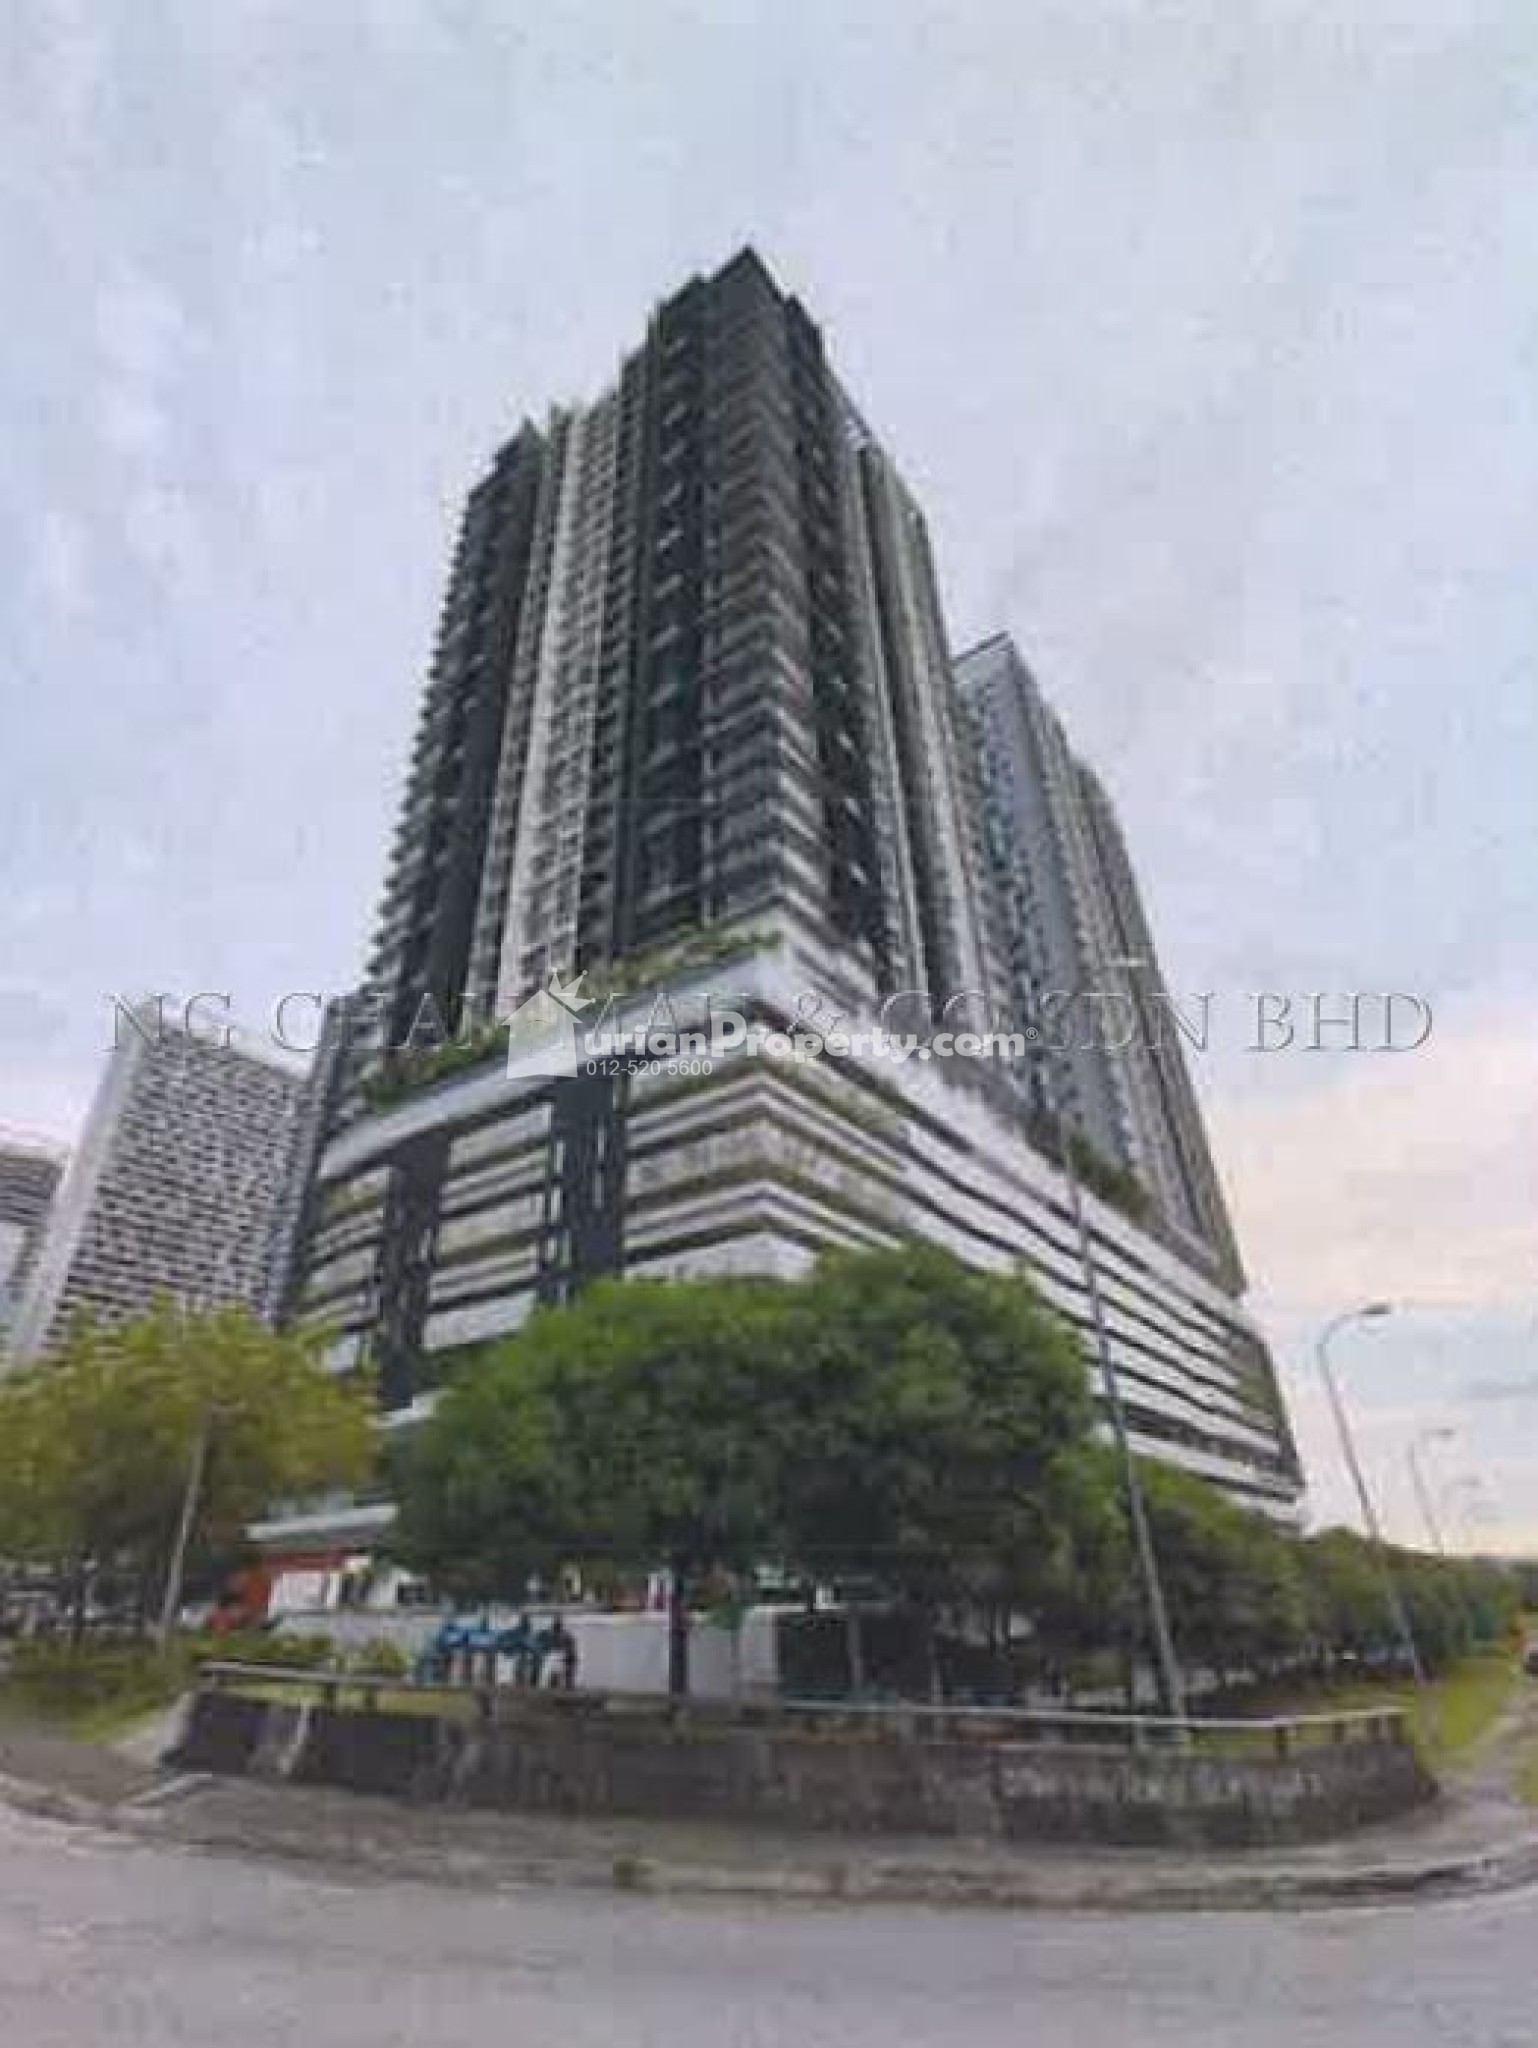 Serviced Residence For Auction at D'Sara Sentral